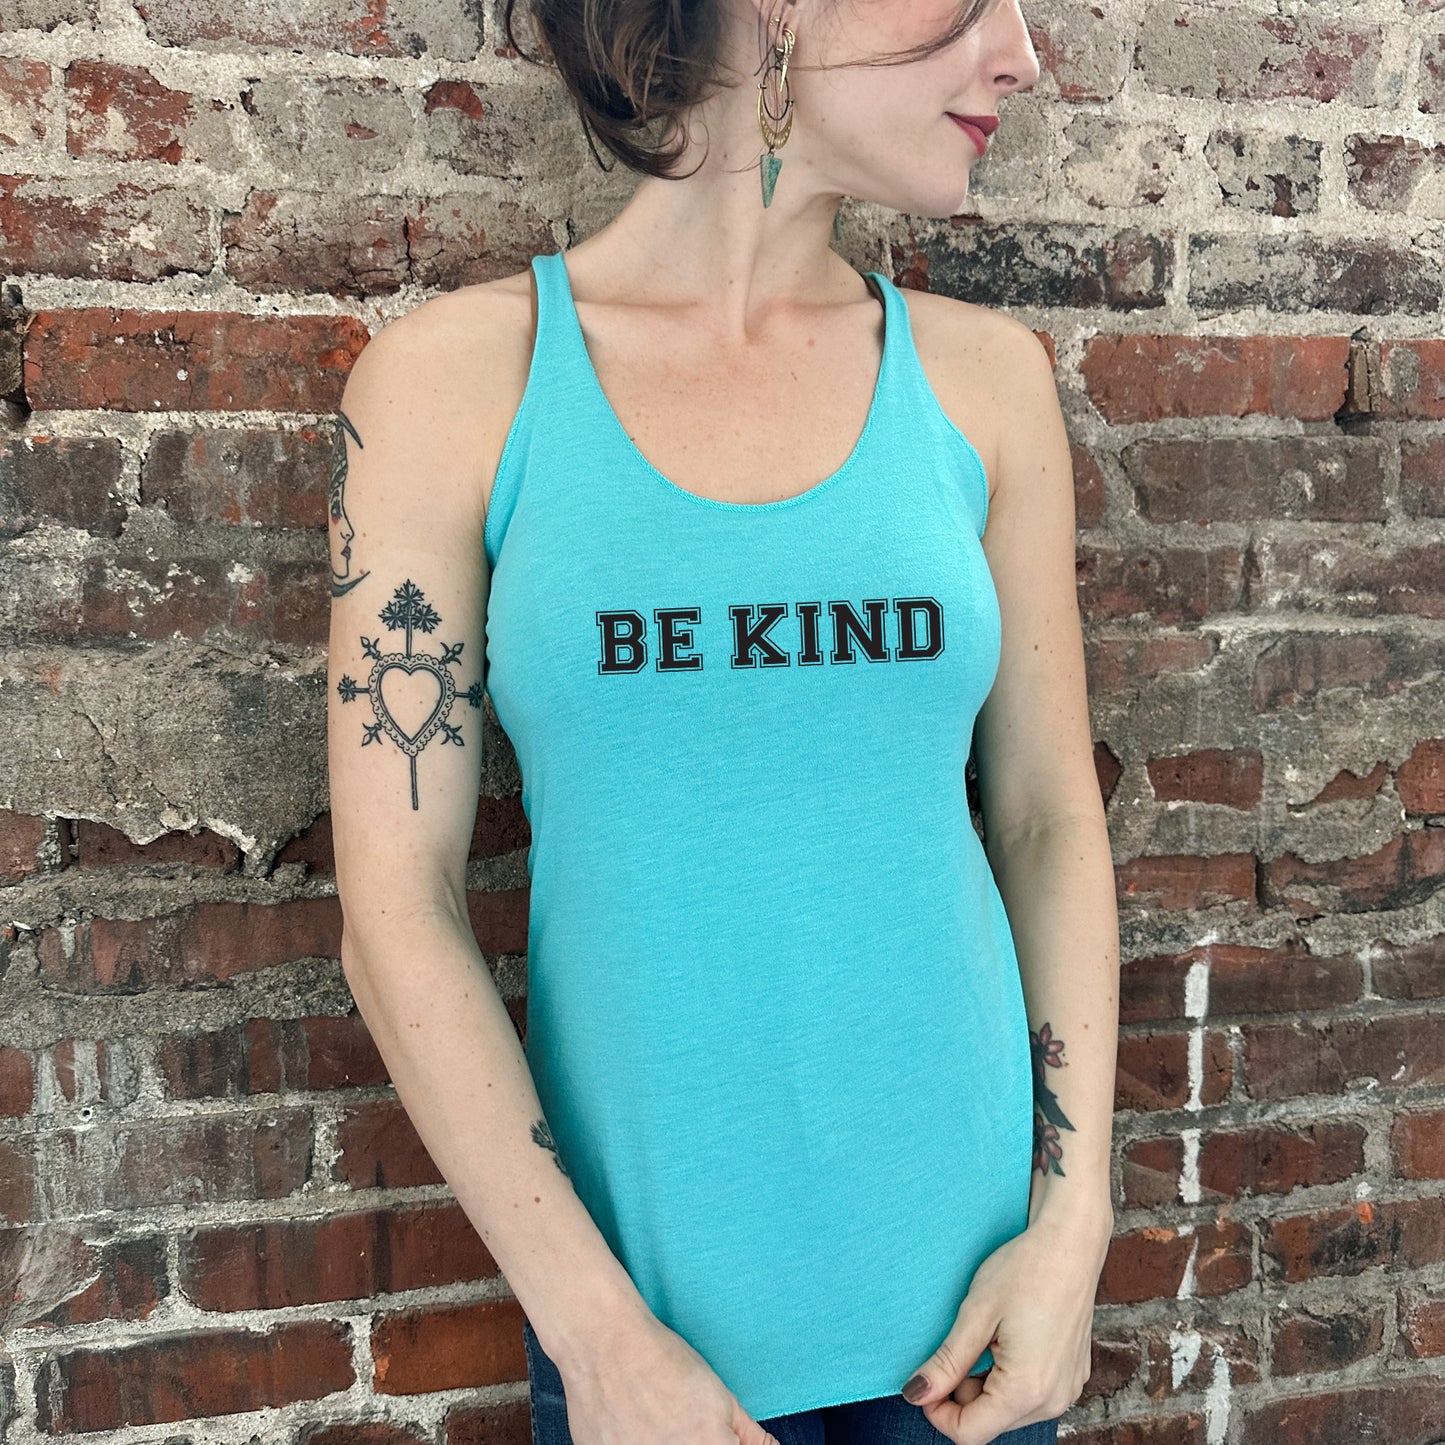 Be Kind - Feel Good Collection - Women's Tank - Heather Gray, Tahiti, or Envy